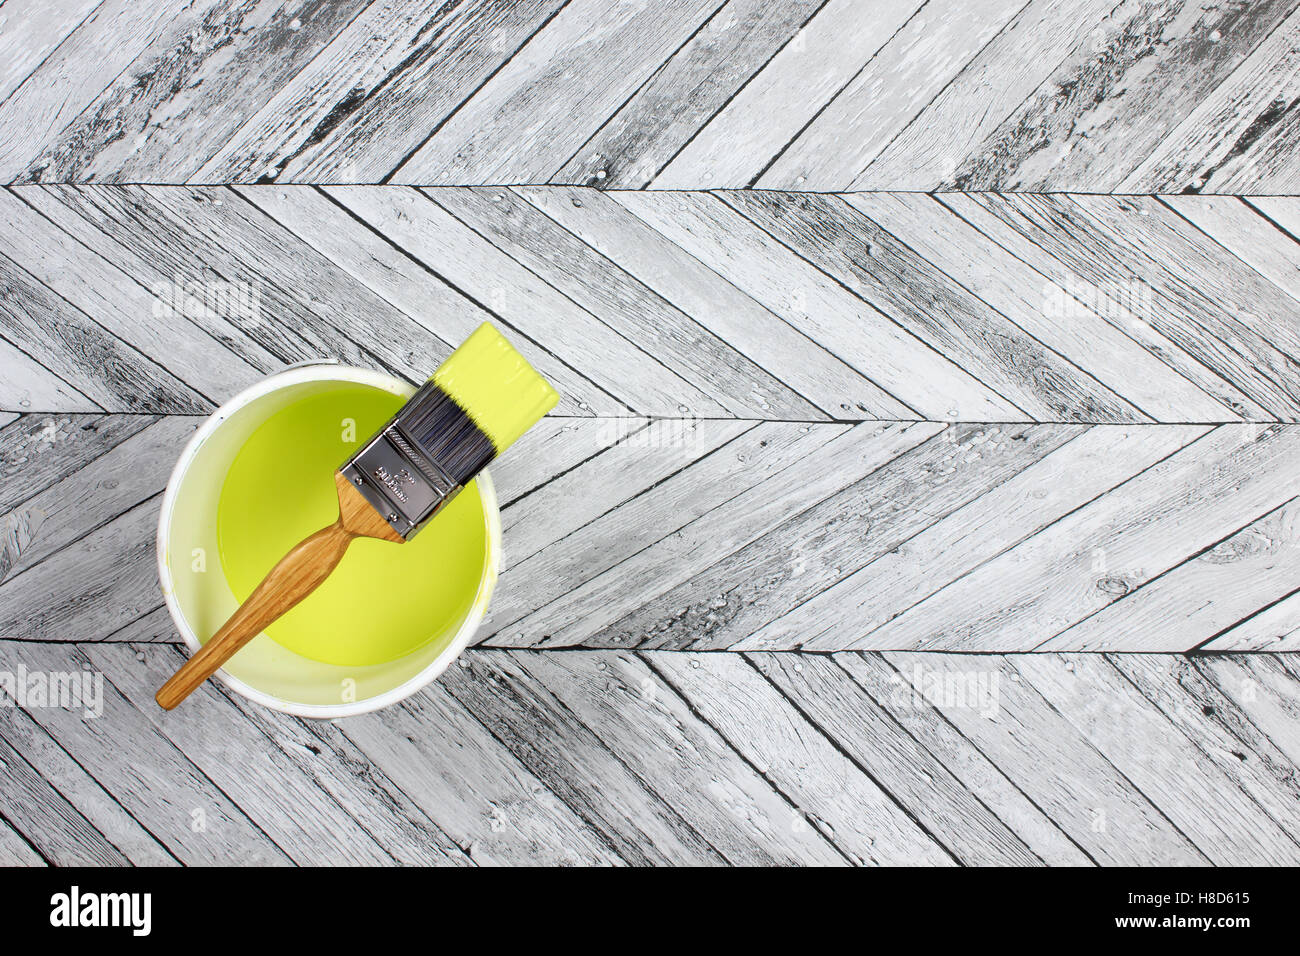 paintbrush placed across a white paint kettle filled with lime green paint on a grey and white herringbone style wood floor Stock Photo